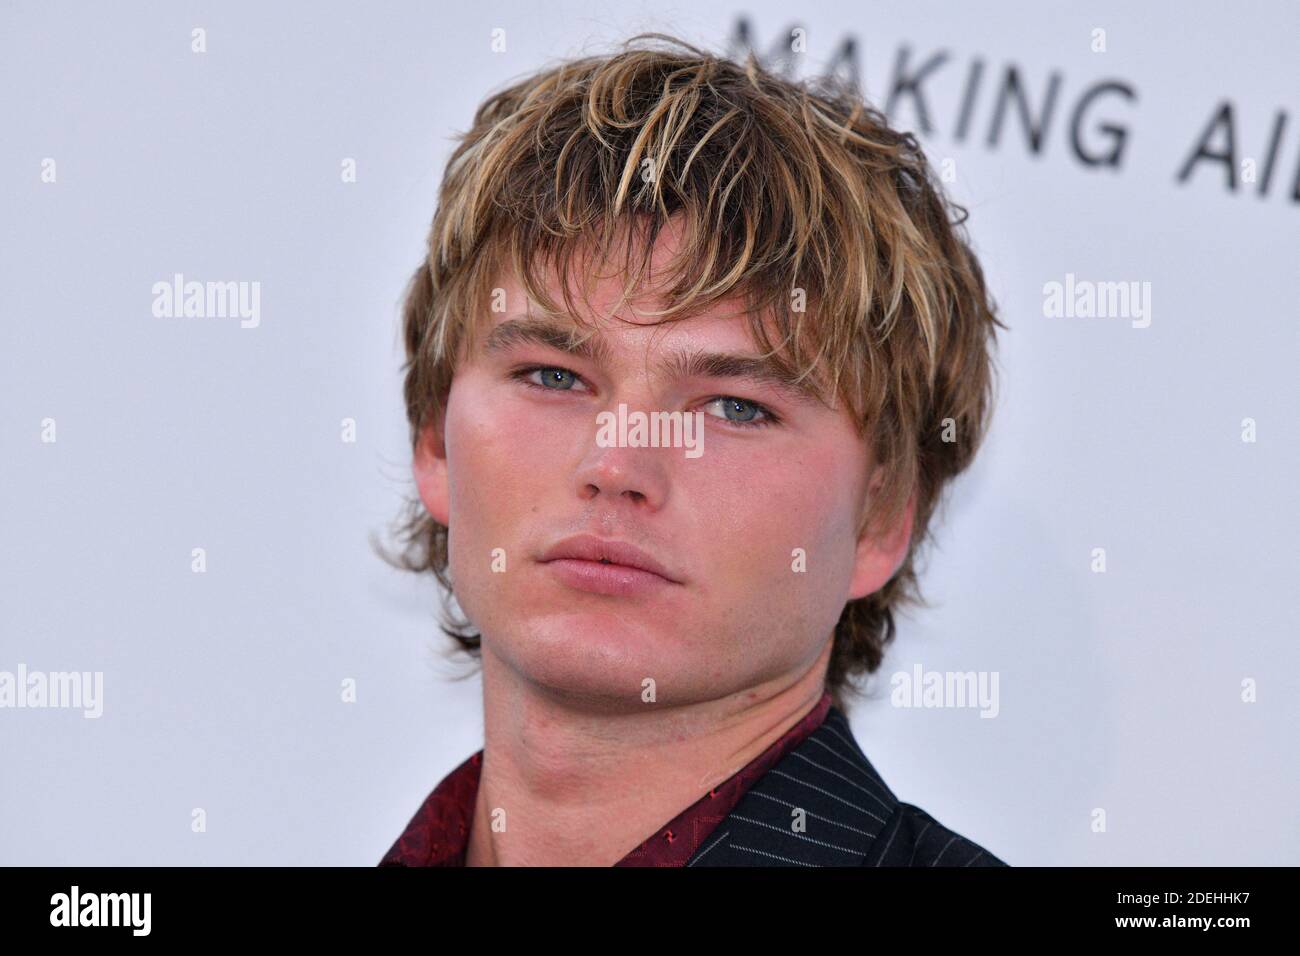 Jordan Barrett attends the amfAR Cannes Gala 2019 at Hotel du Cap-Eden-Roc  on May 23, 2019 in Cap d'Antibes, France. Photo by Lionel  Hahn/ABACAPRESS.COM Stock Photo - Alamy